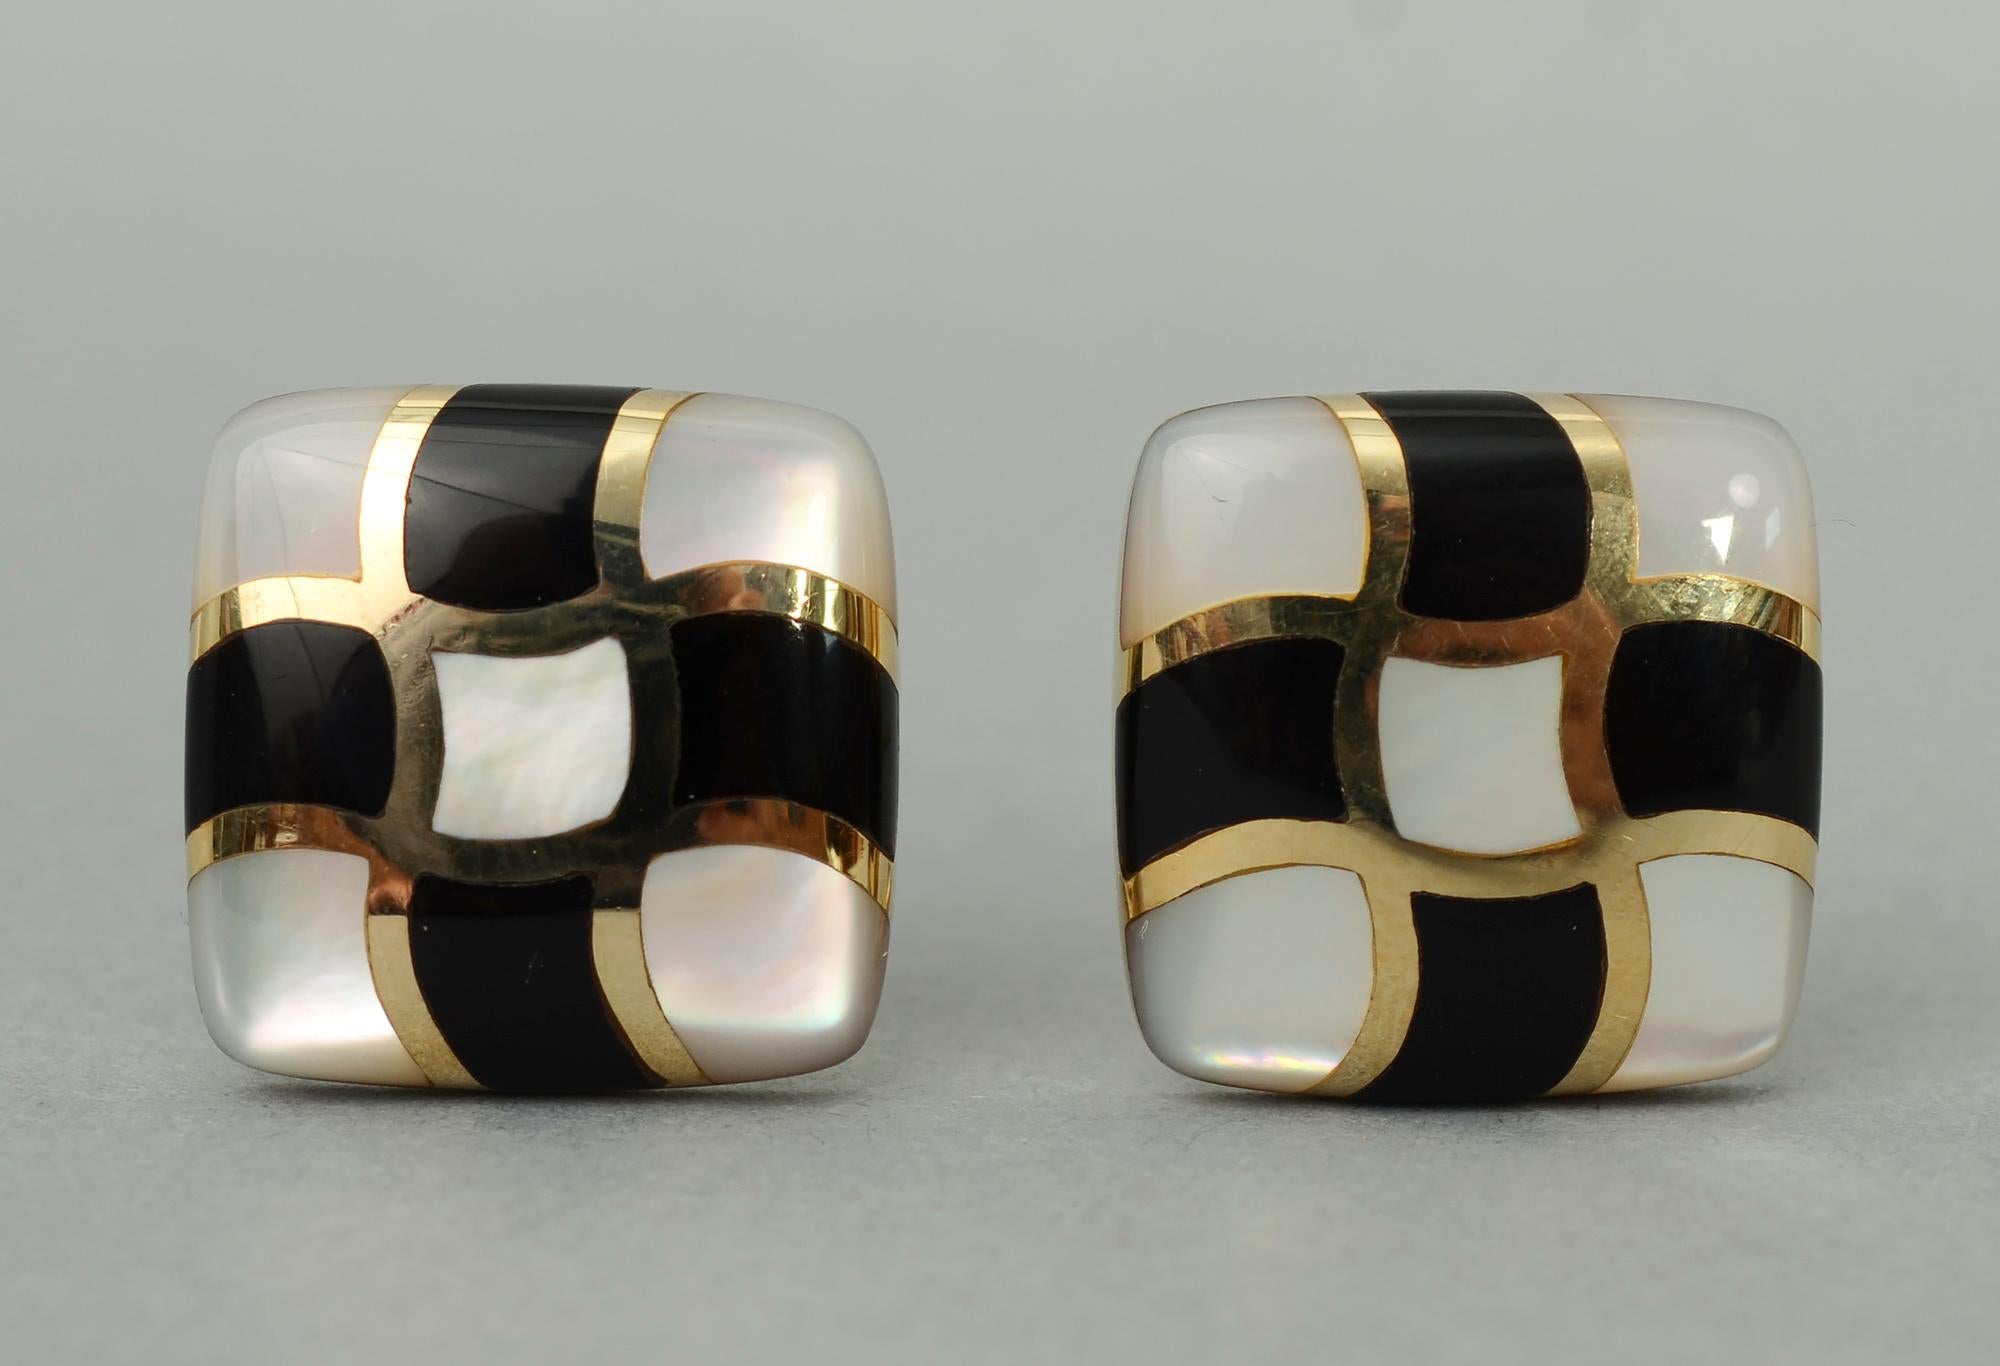 Chic black and white earrings by Asch Grossbardt with onyx and mother of pearl. Dividing the nine squares with curved gold banding makes them especially jazzy. The earrings measure 13/16